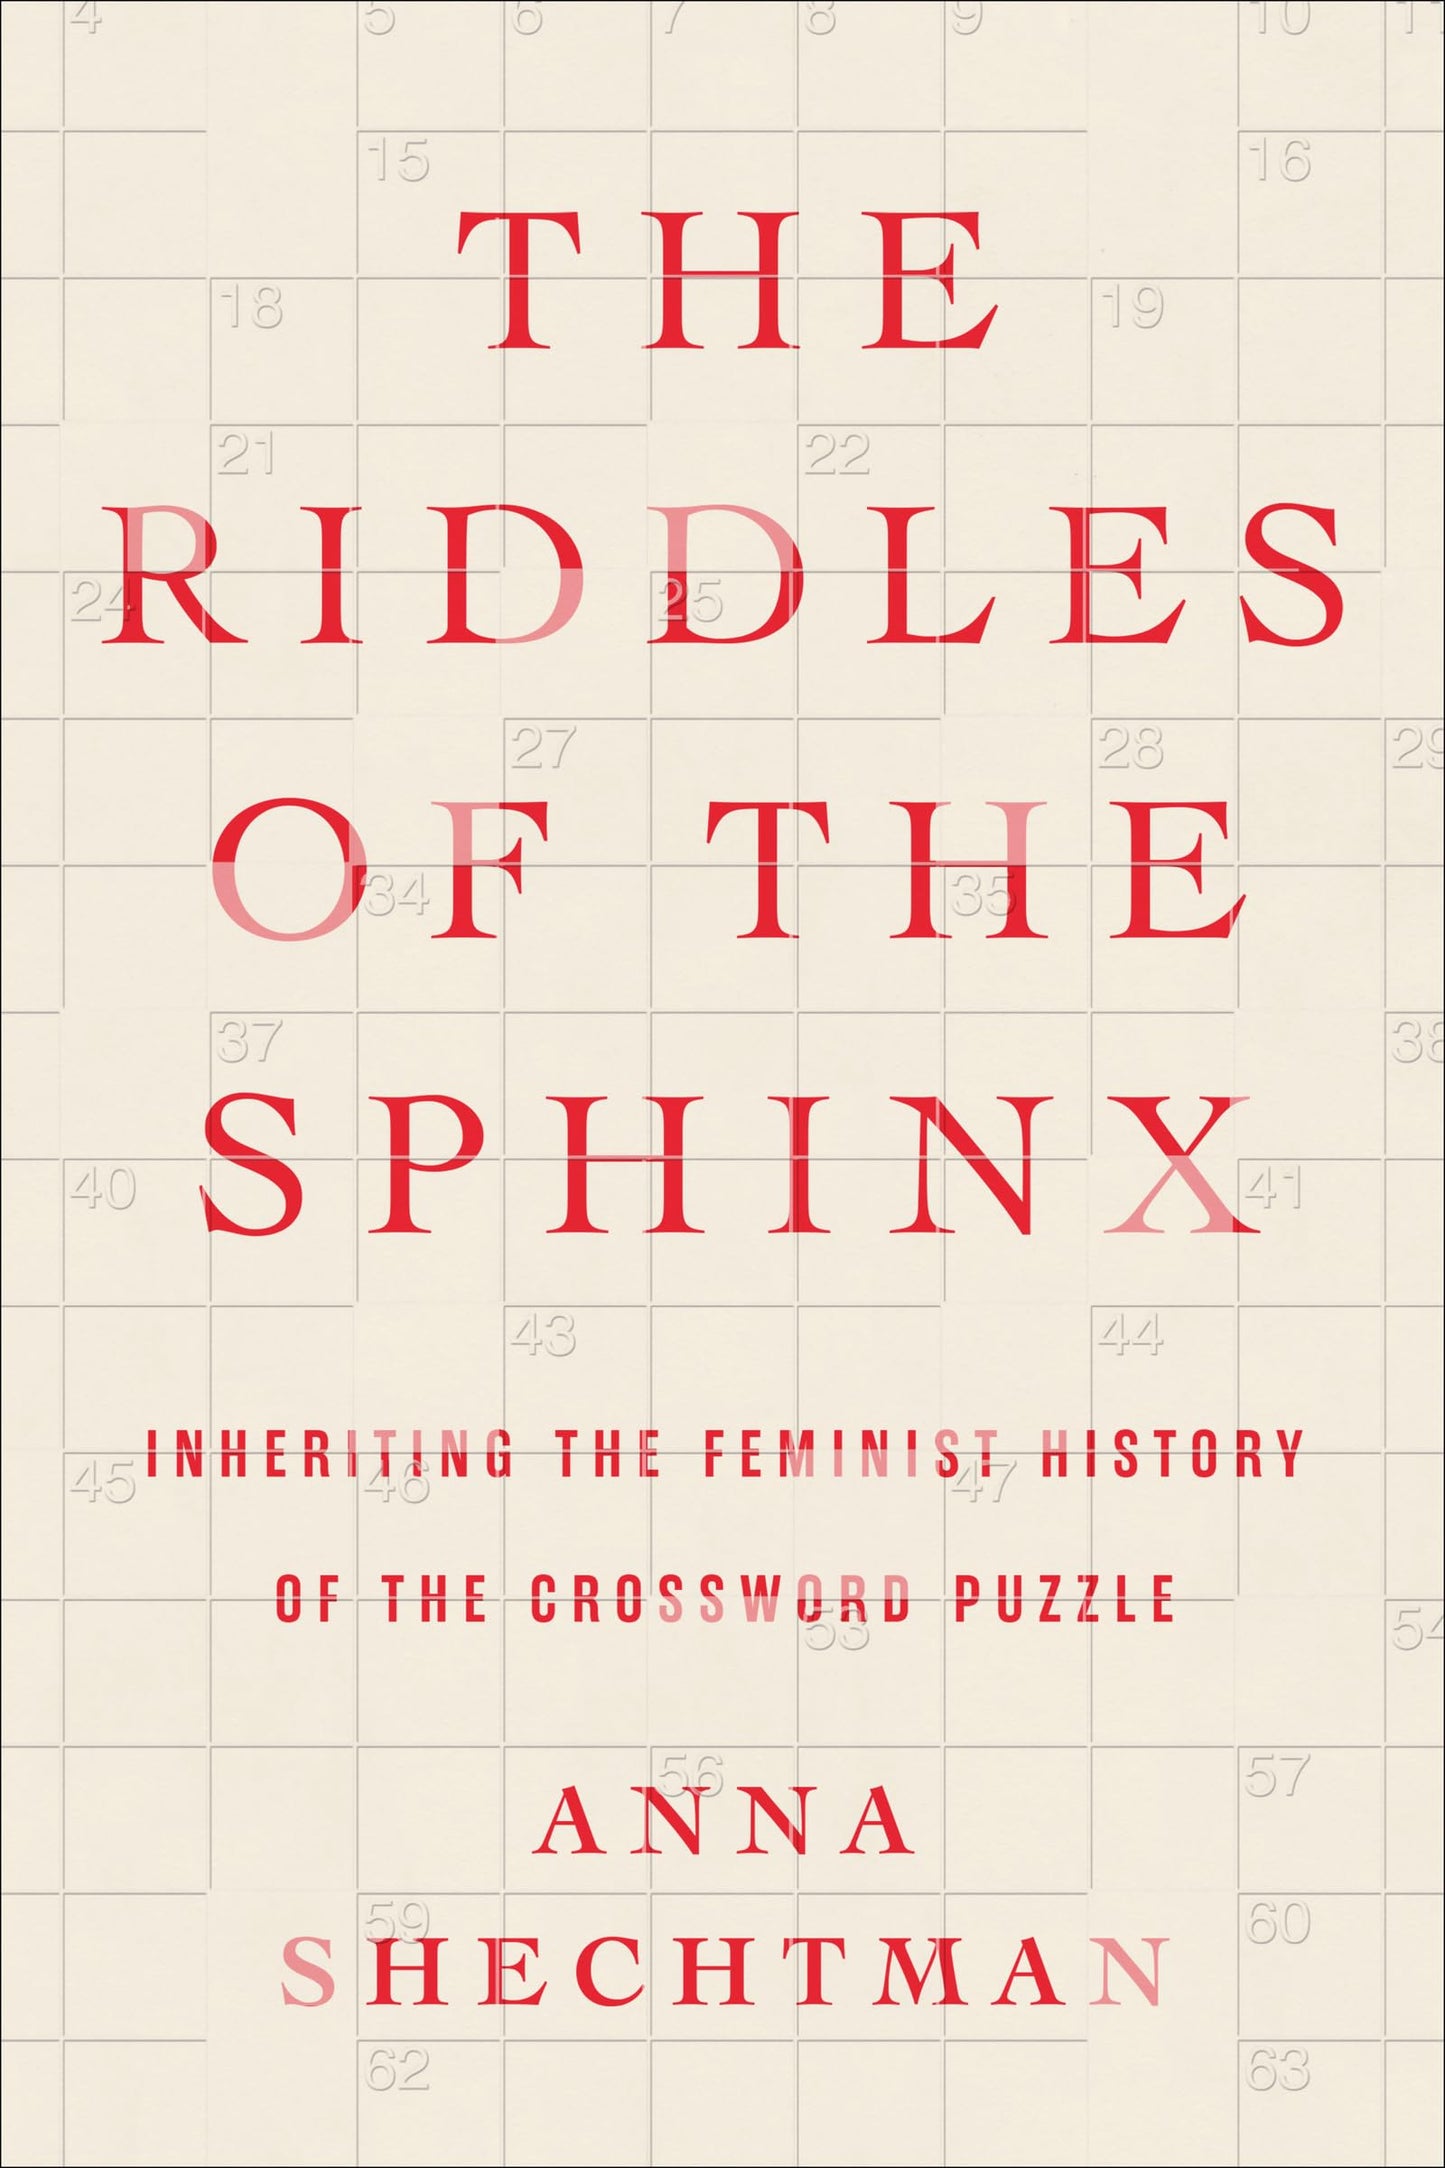 Riddles of the Sphinx: Inheriting the Feminist History of the Crossword Puzzle